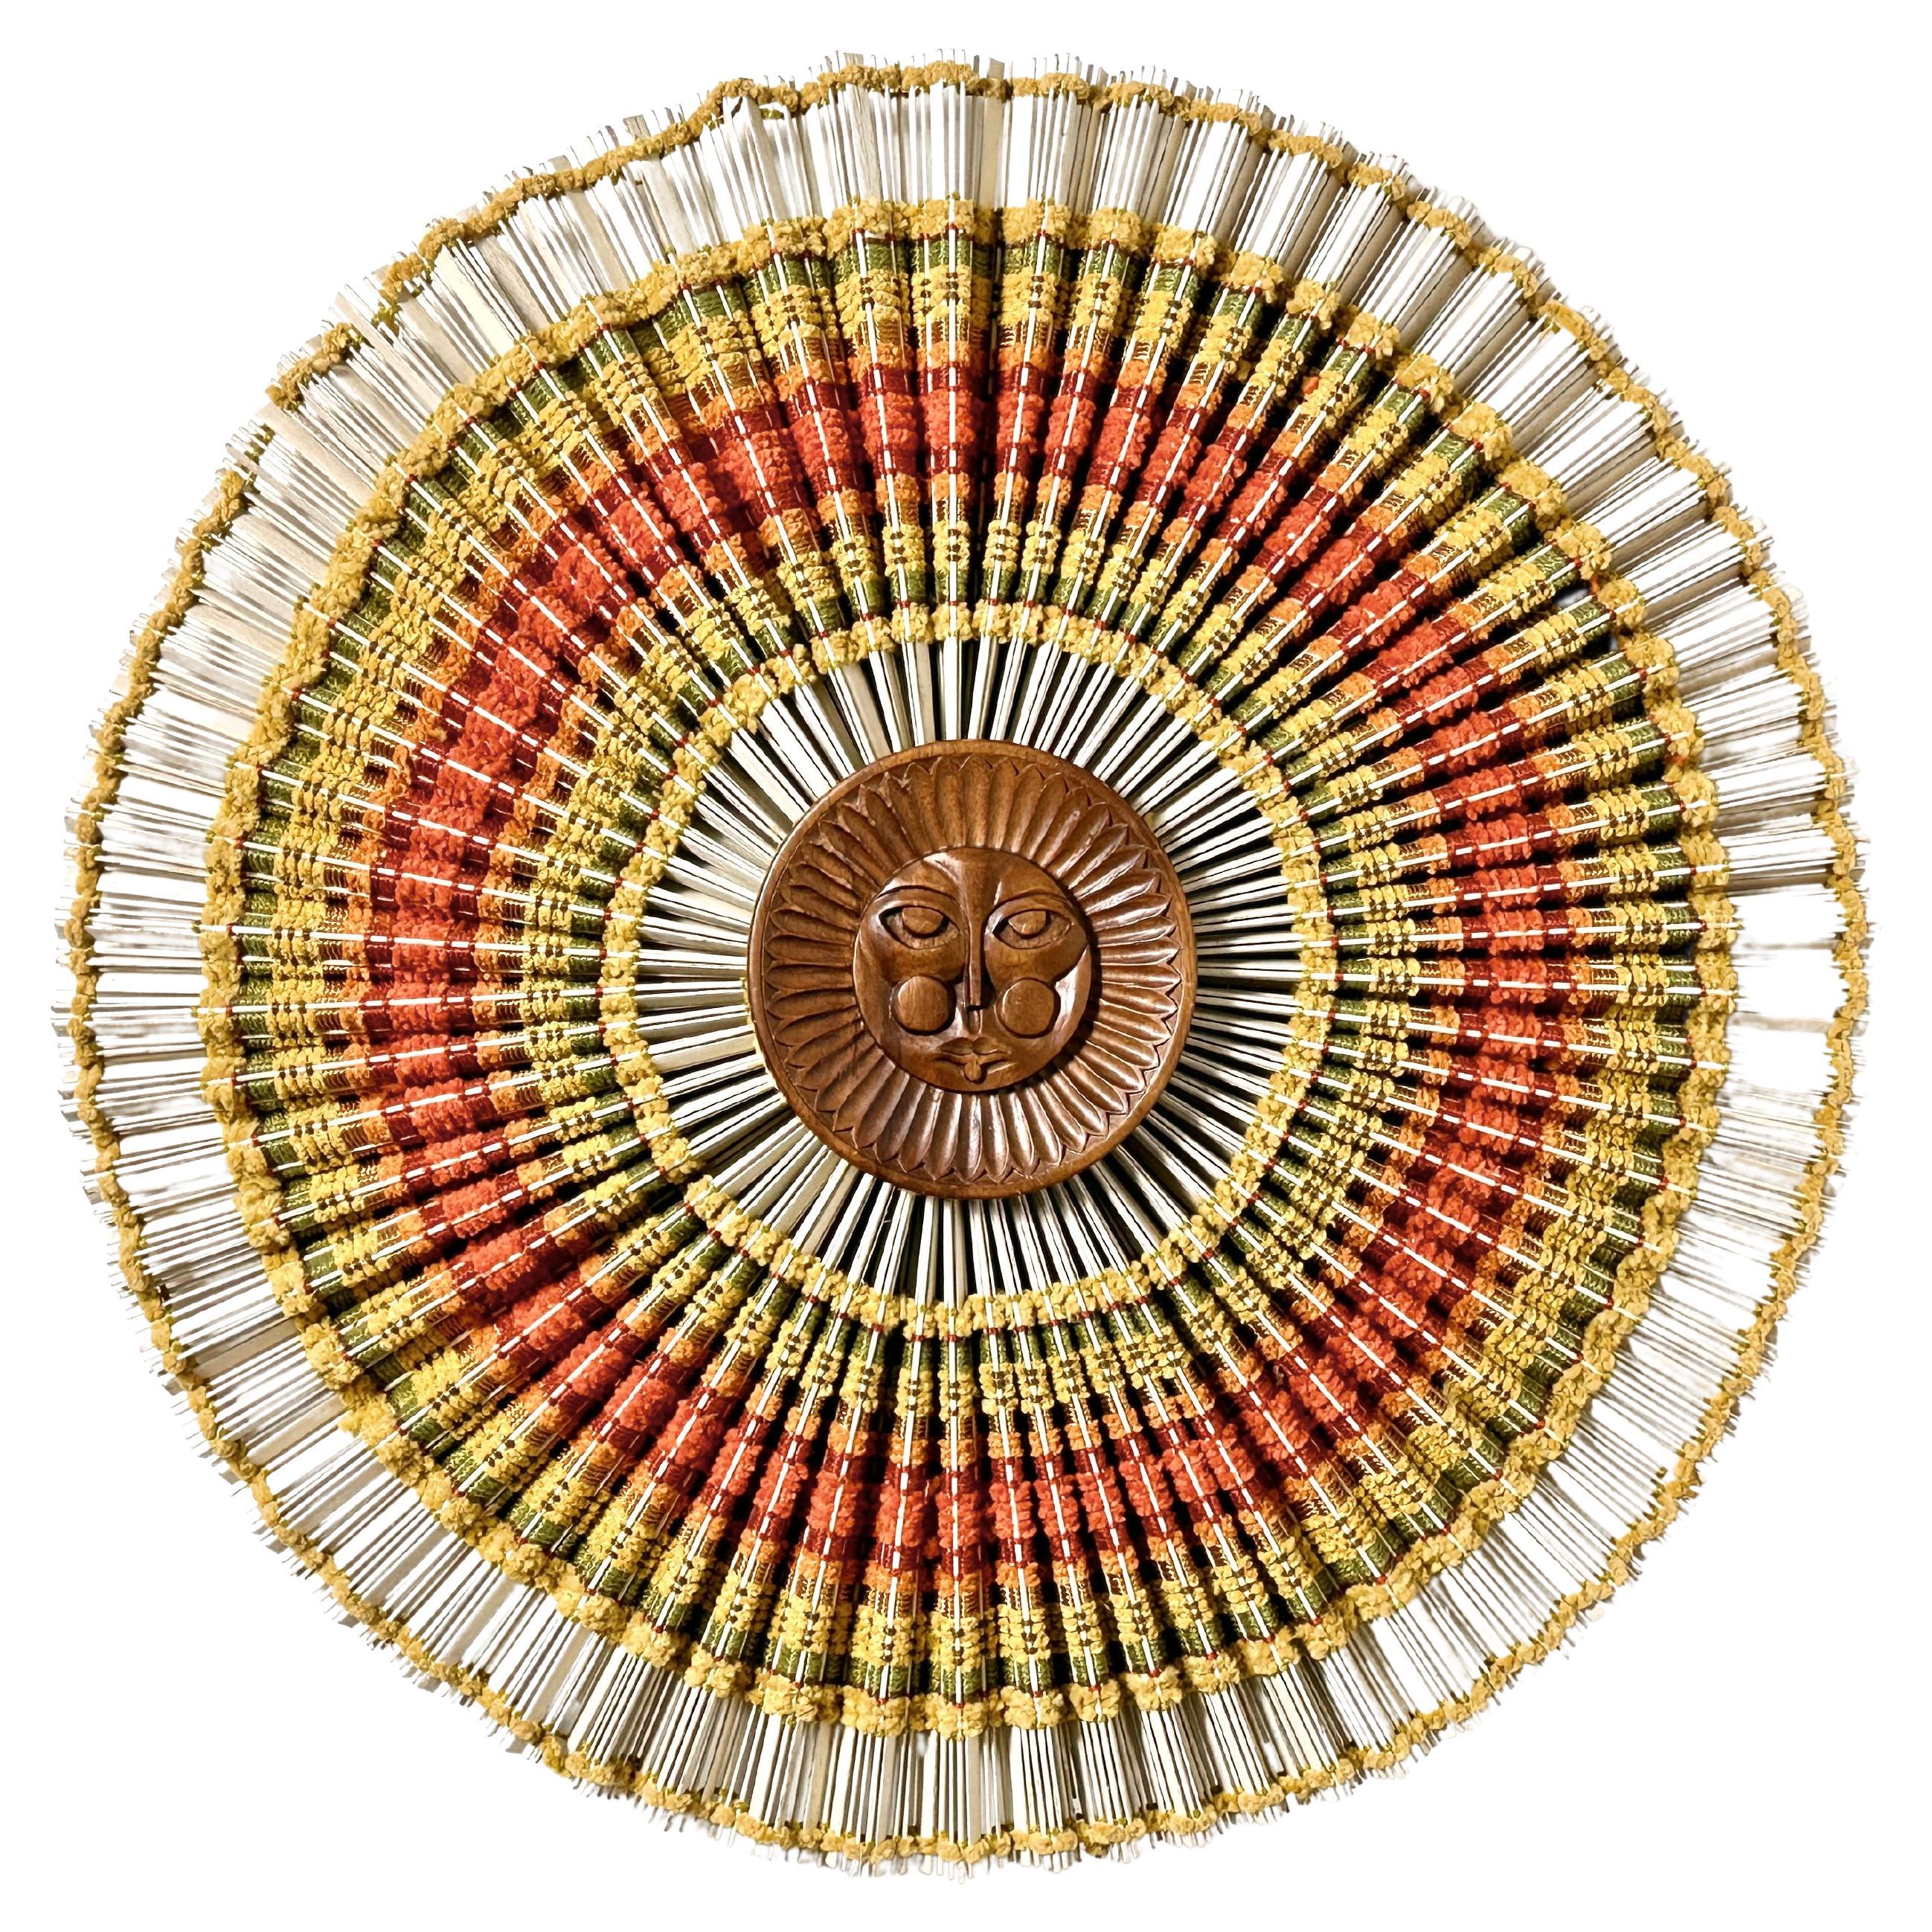 Woven fiber art wall sculpture by Maria Kipp c1960s
Dramatic sunburst of multi colored woven textiles over pleated wooden slats with a carved wood sun face center.
30 in diameter